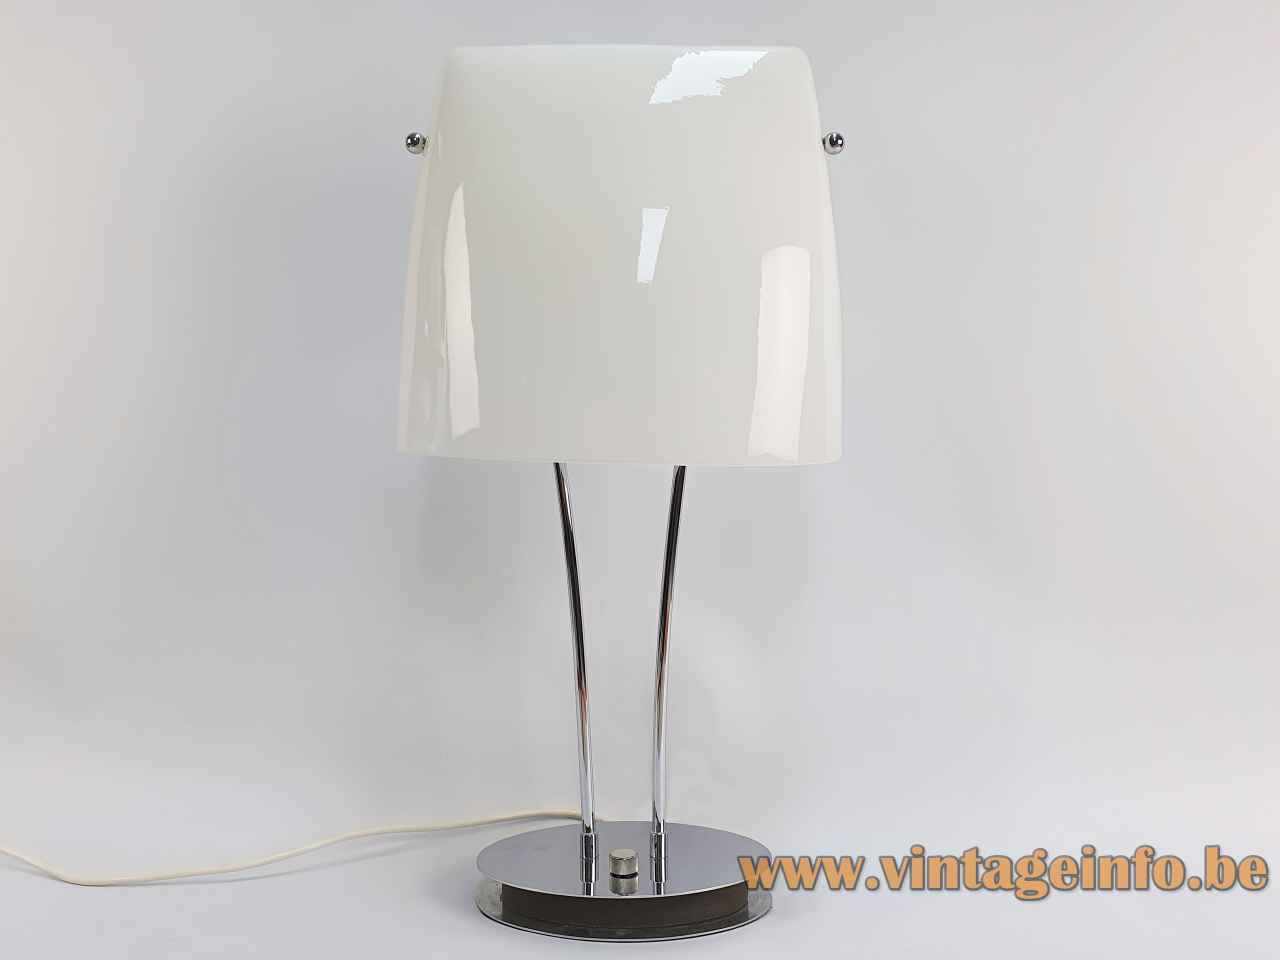 VeArt Masha table lamp round chrome base opal glass lampshade 1990s design: Jeannot Cerutti Artemide Italy